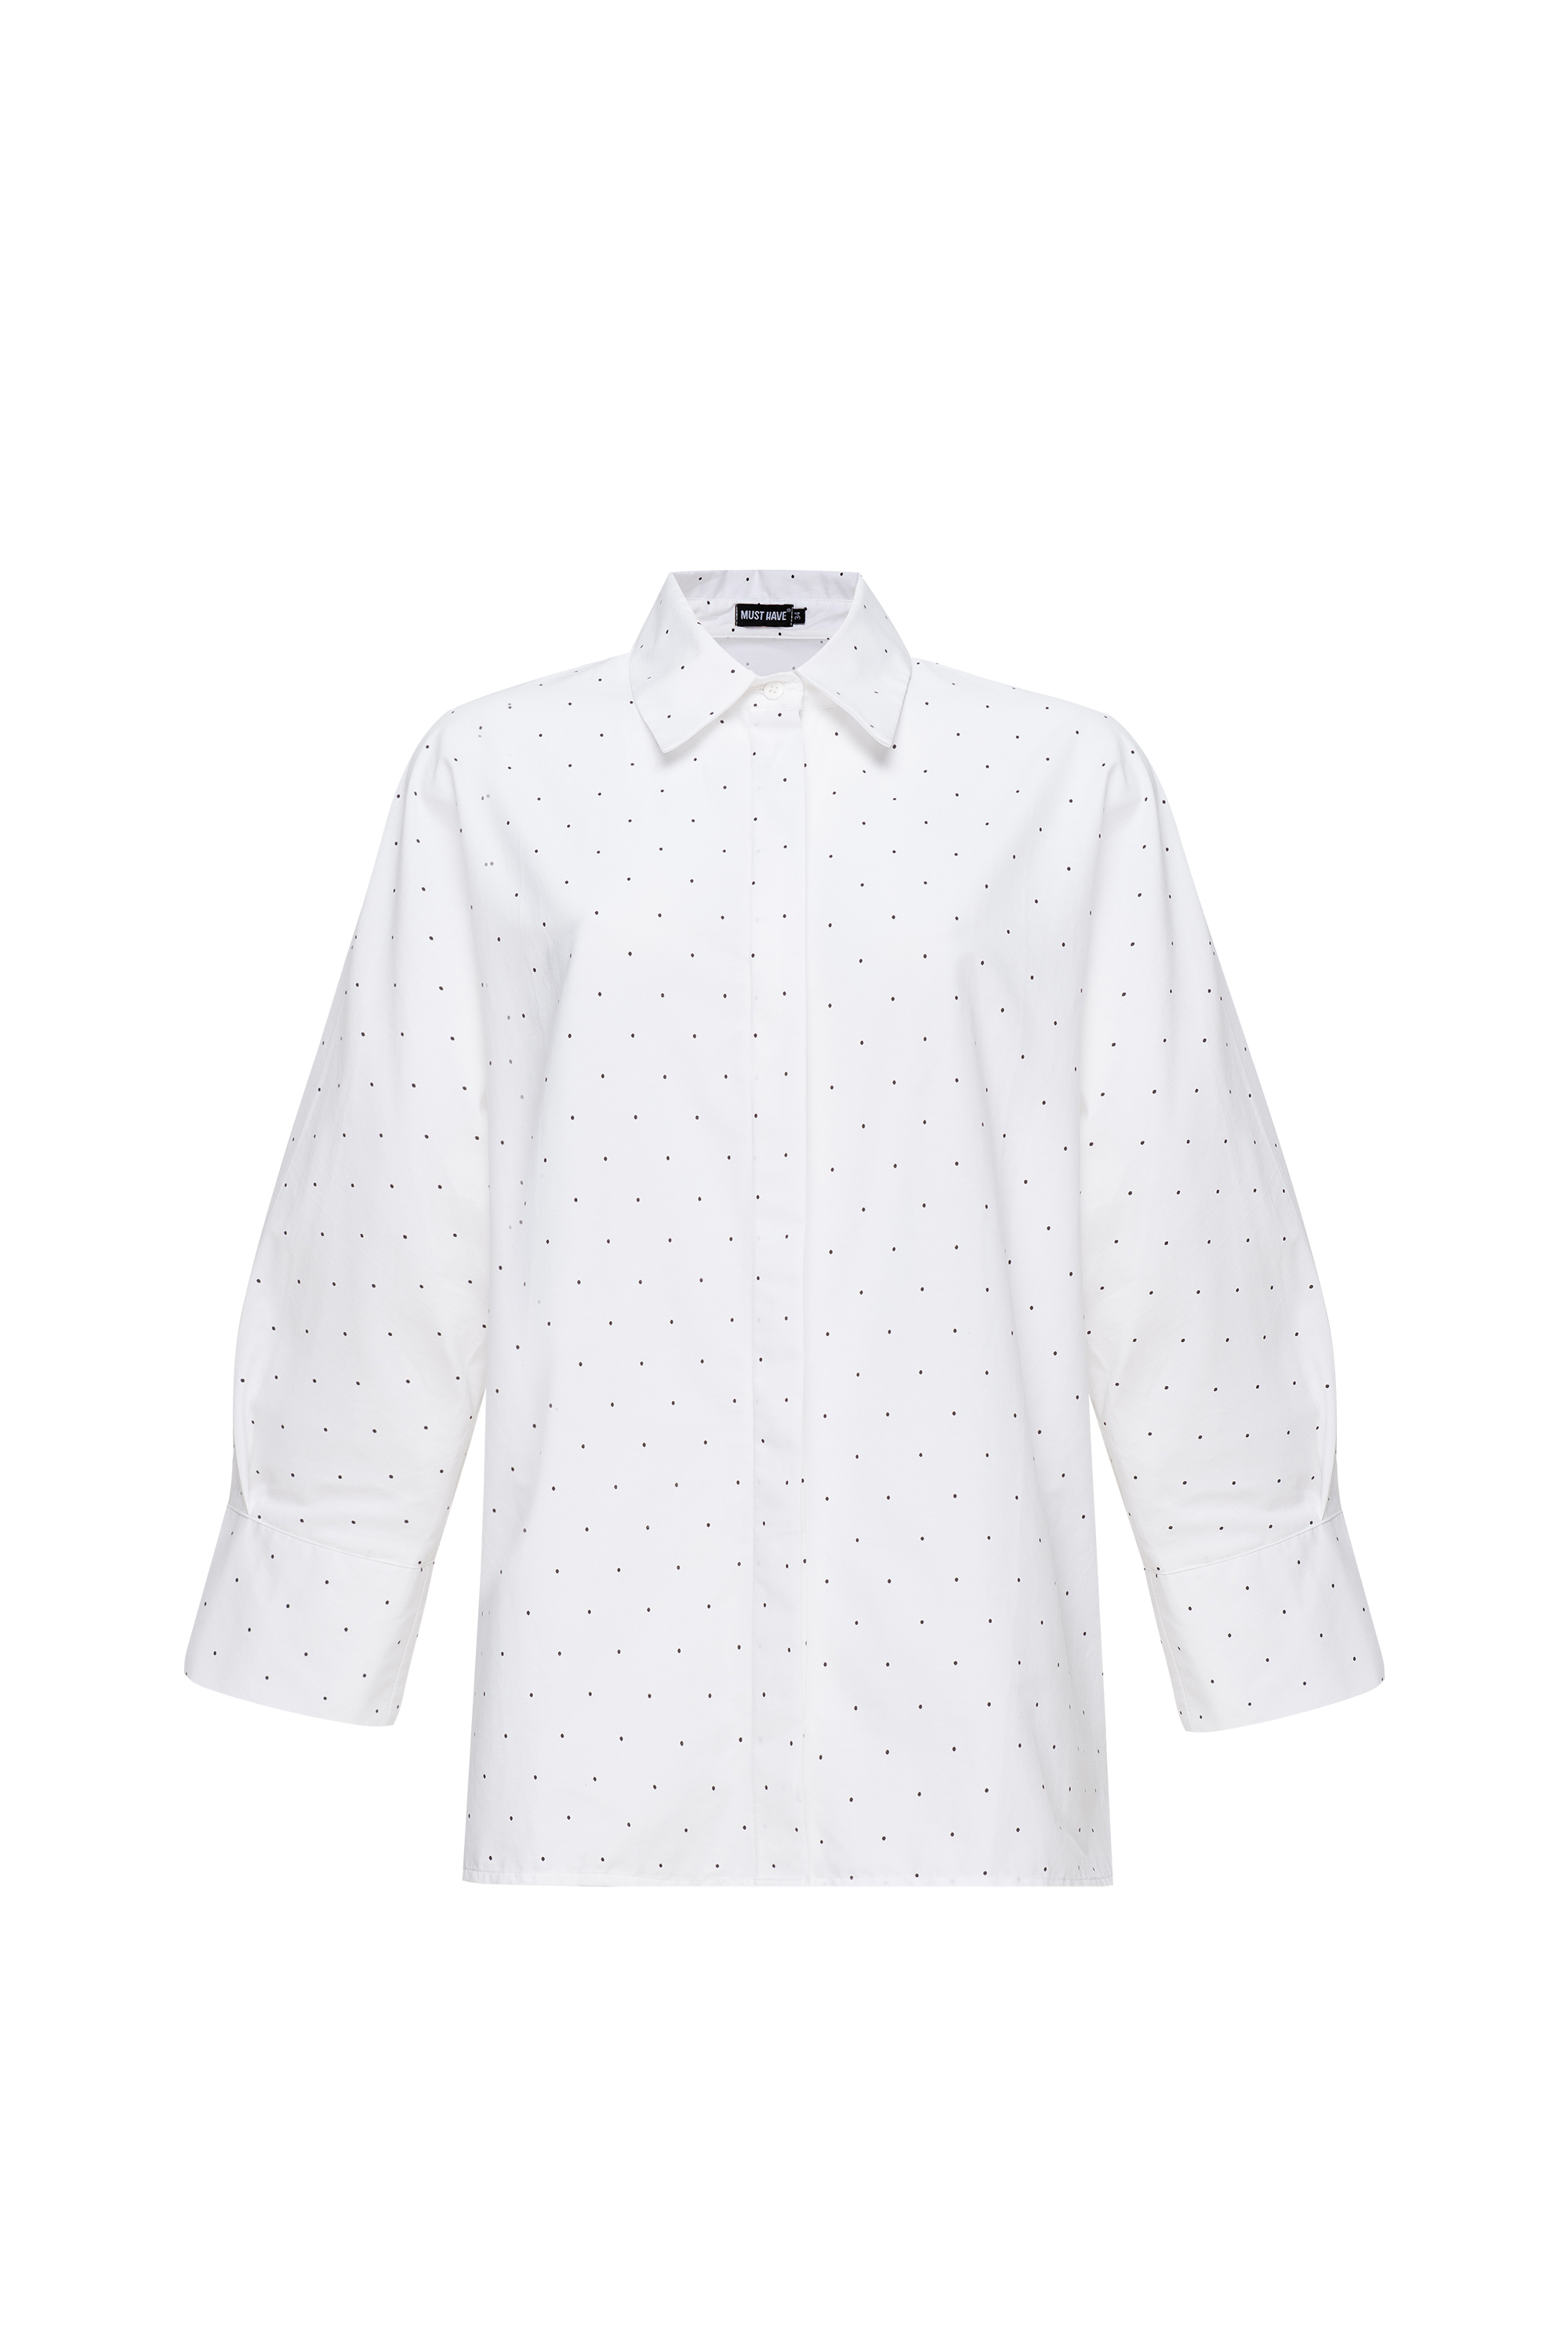 Loose-fitting white shirt with a black polka dot print and a concealed placket, photo 9